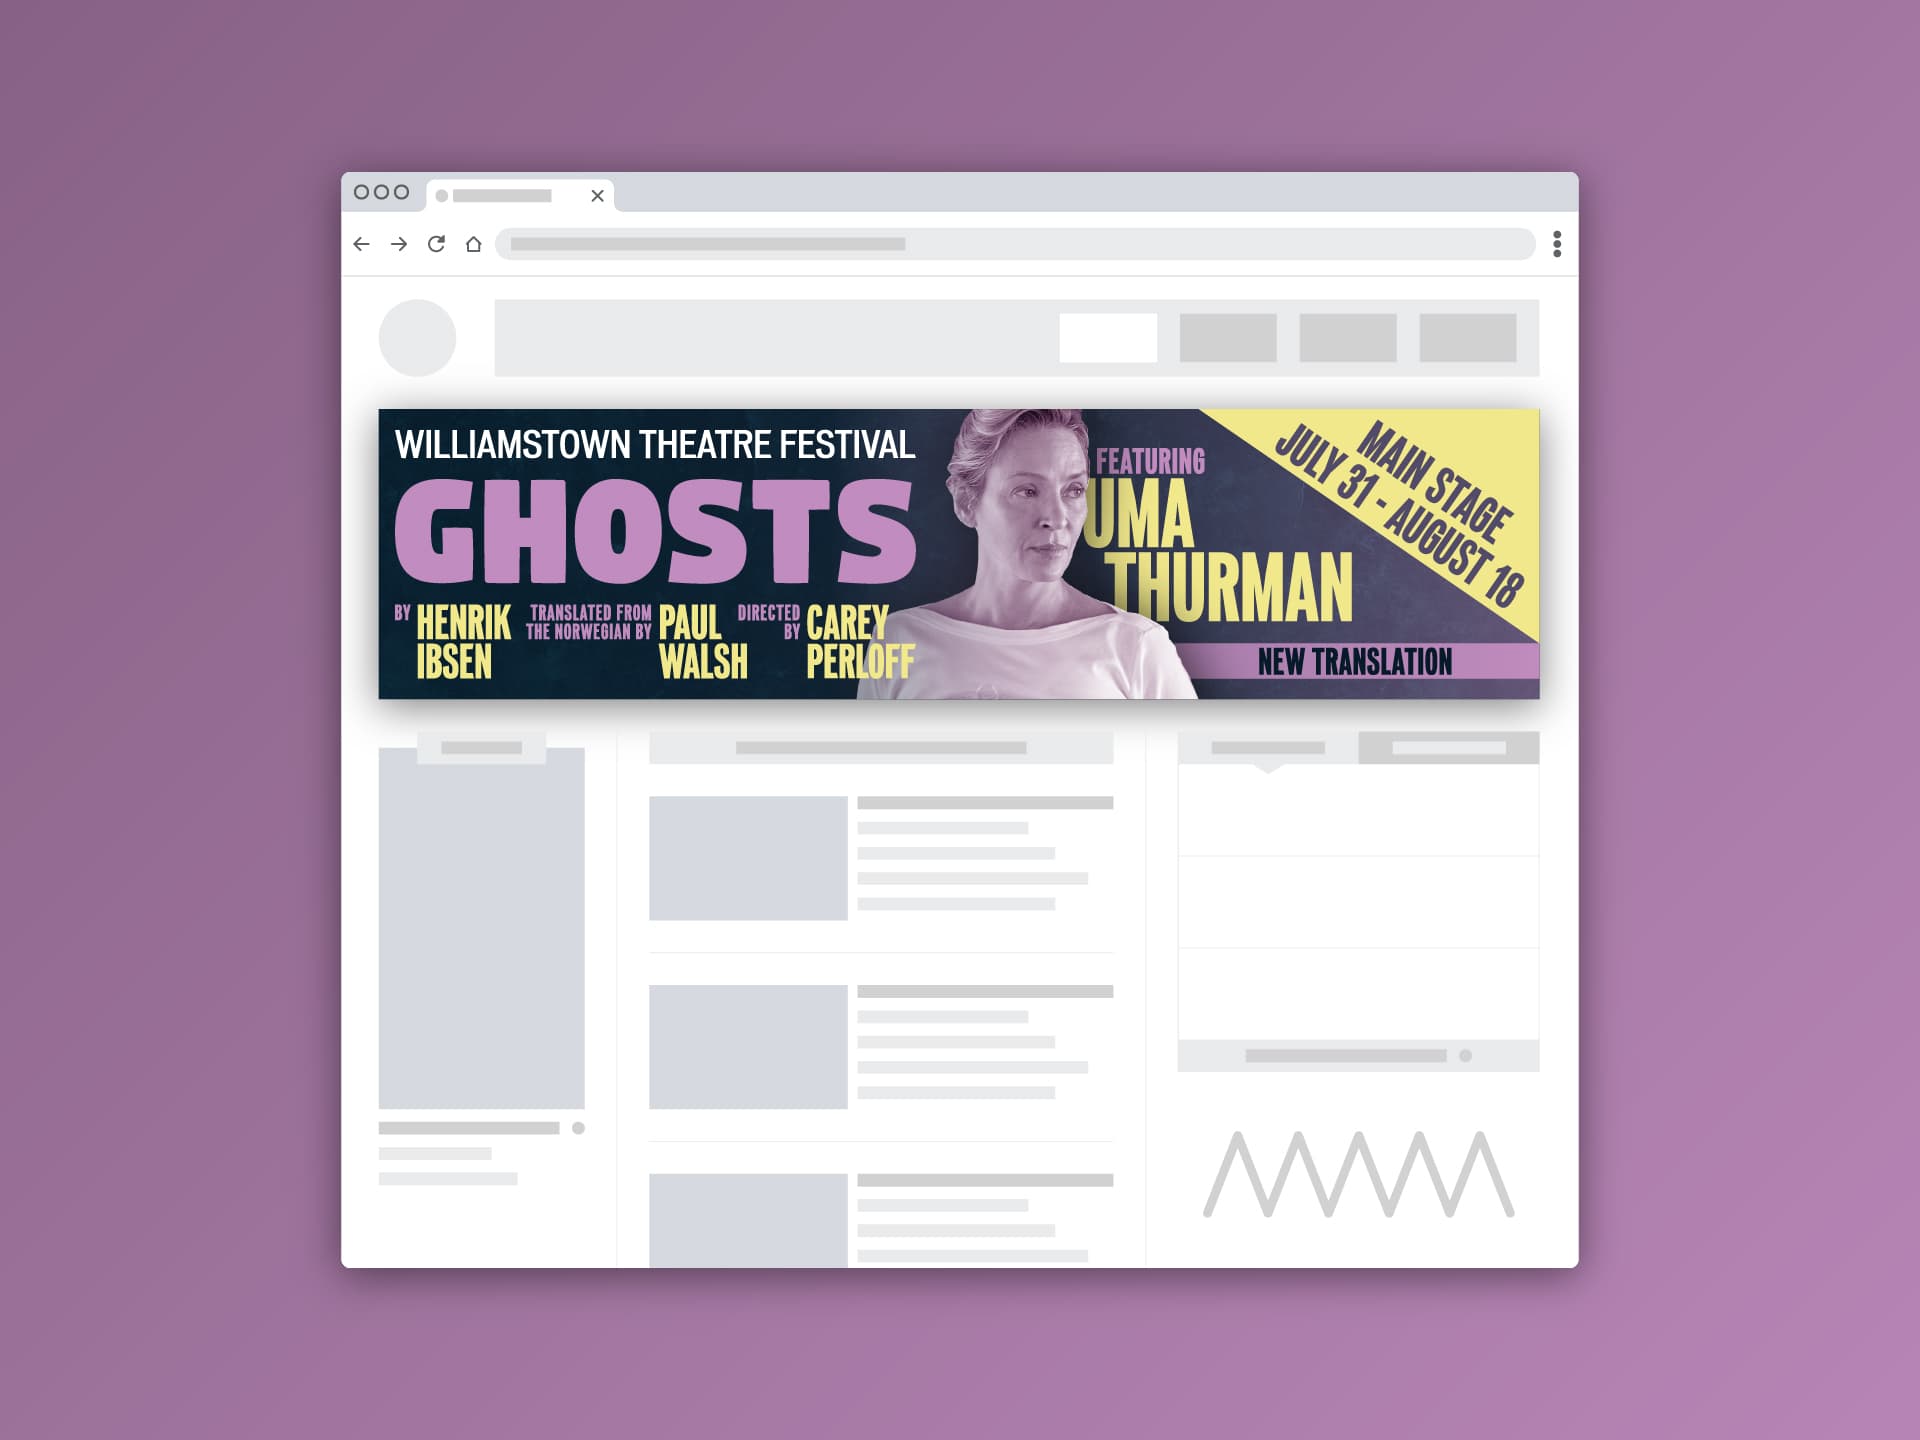 “Ghosts” banner ad